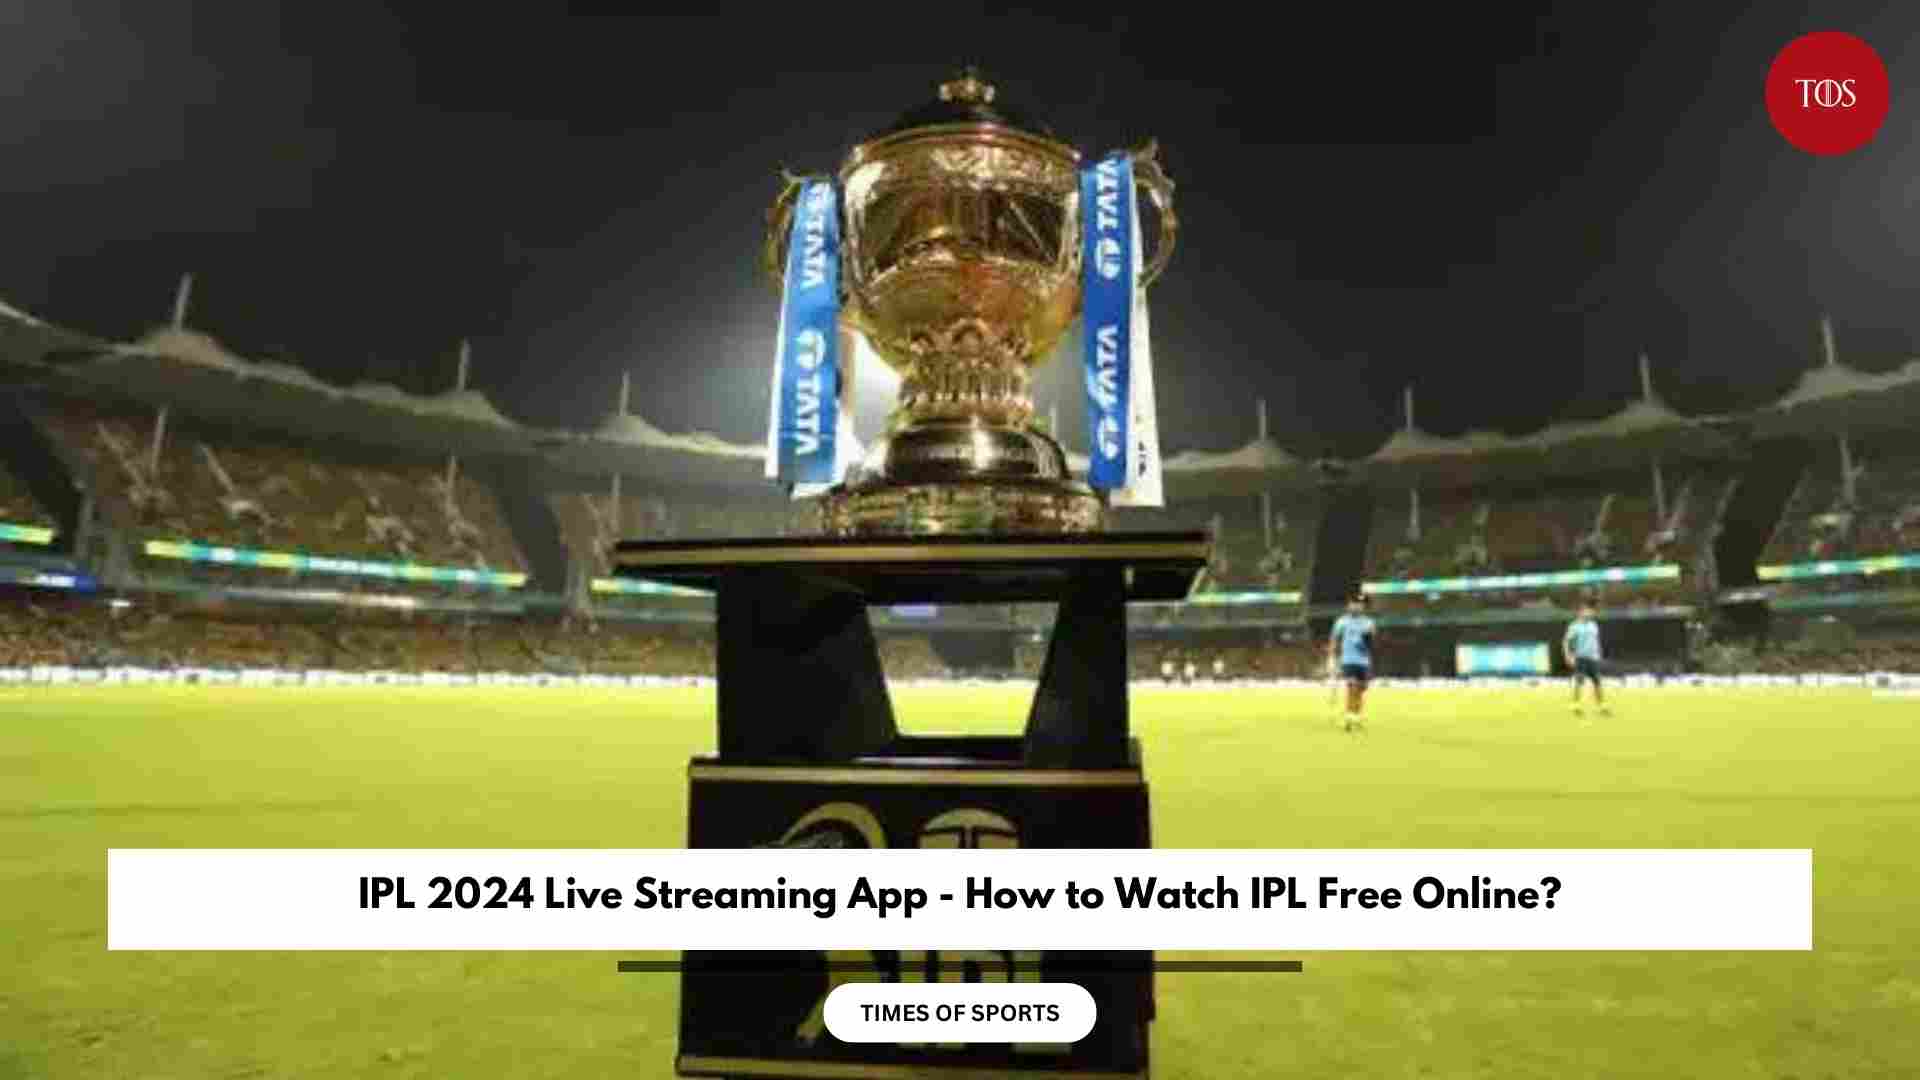 IPL 2024 Live Streaming App How to Watch IPL Free Online?